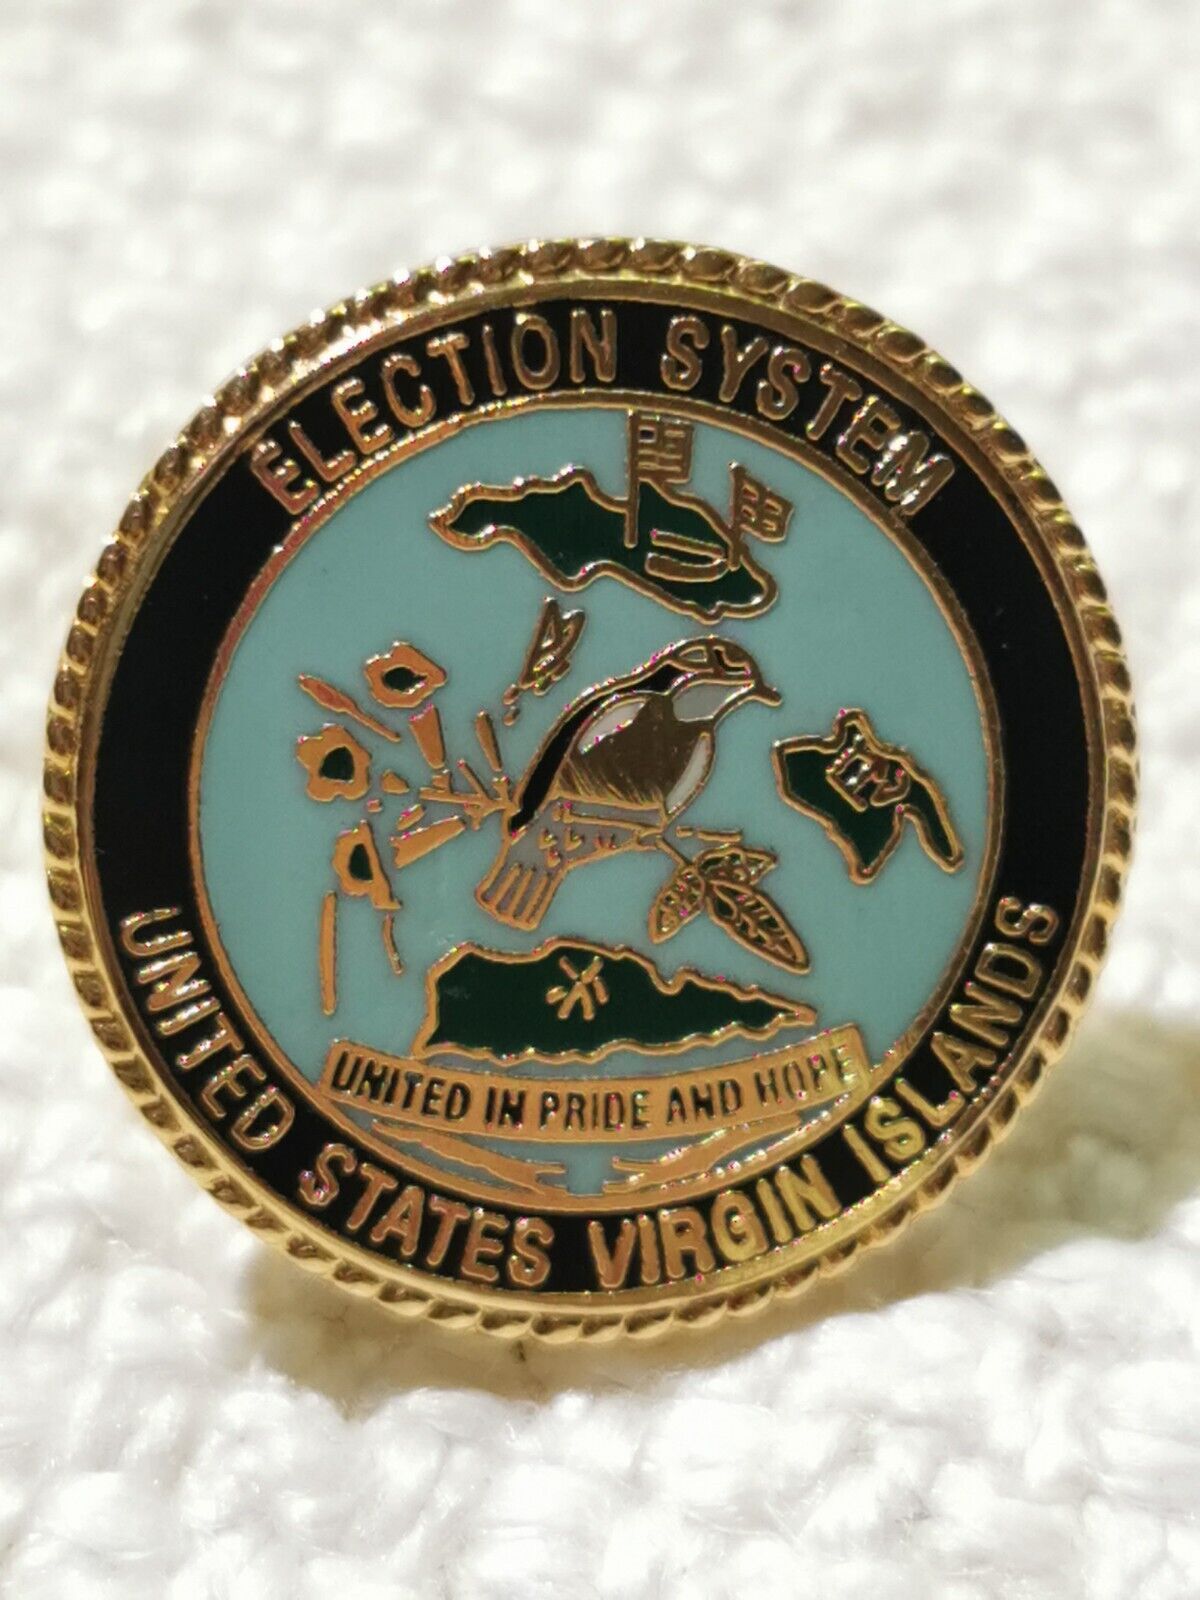 Very Rare Election System, Unites States Virgin Islands Enamel And Metal Pin 